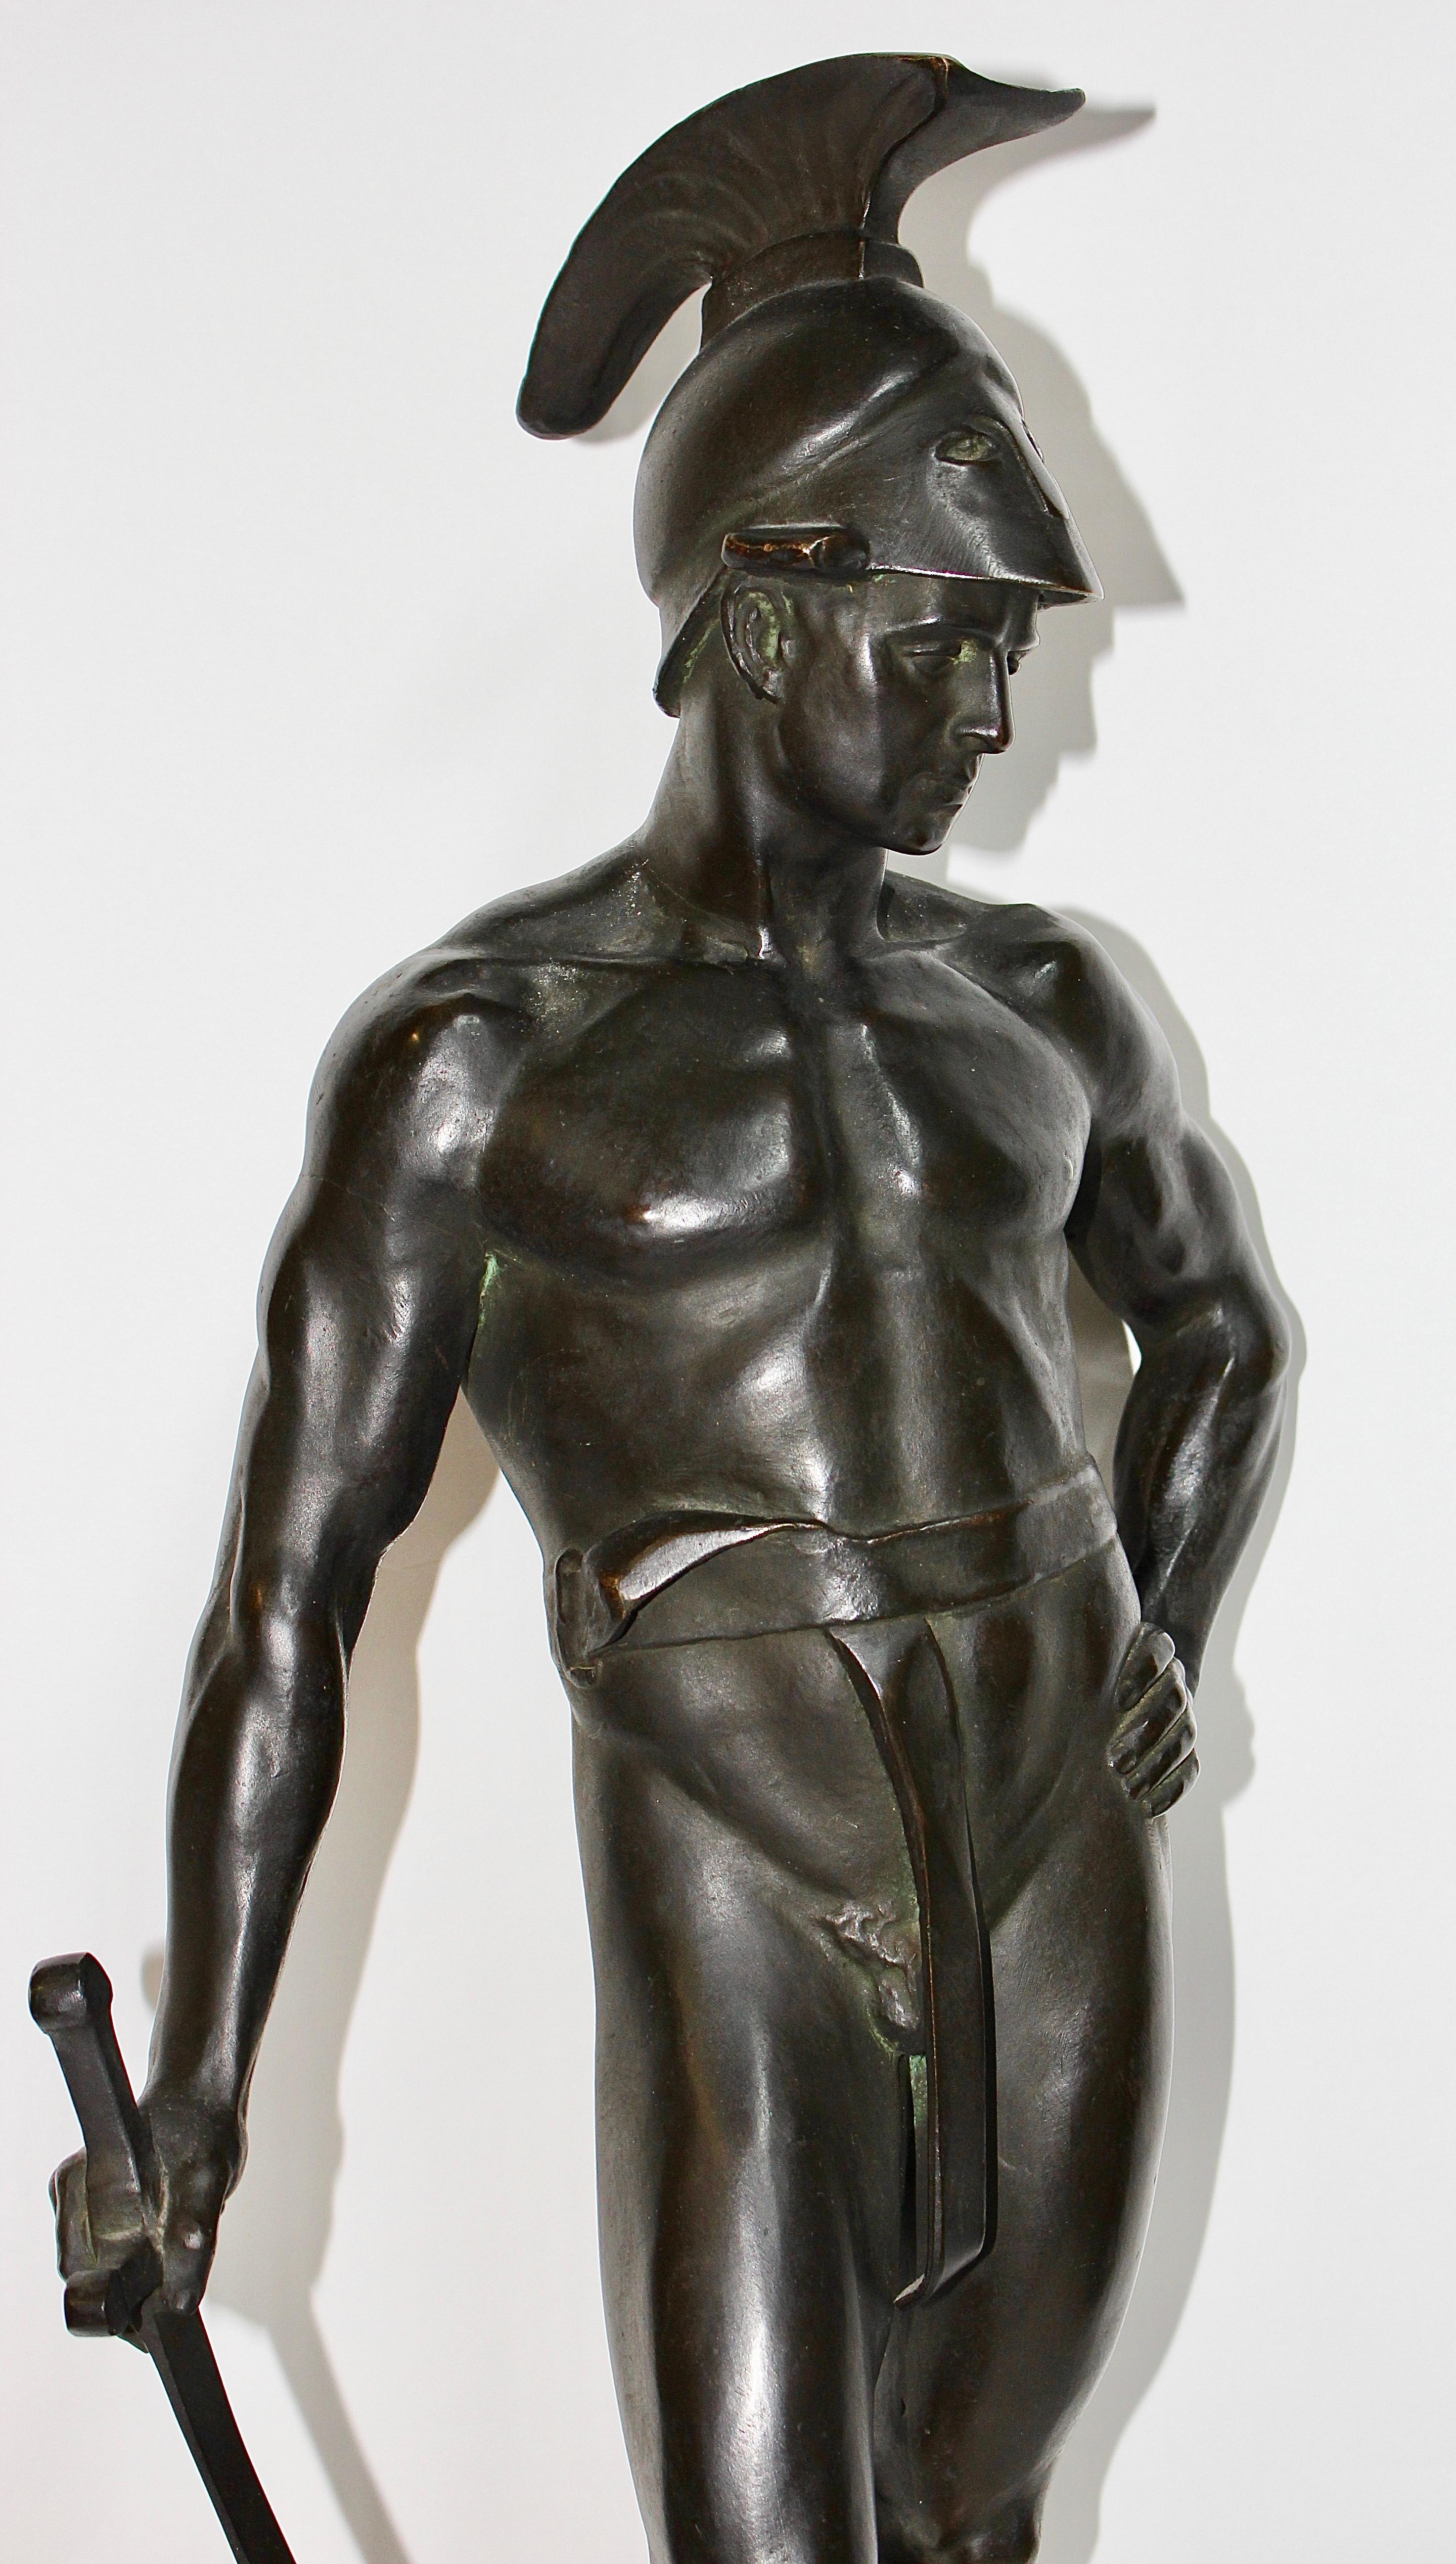 Large and decorative bronze sculpture of a Spartan warrior.
By Professor Victor Heinrich Seifert. Signed.

Excellent masterpiece. On marble base.